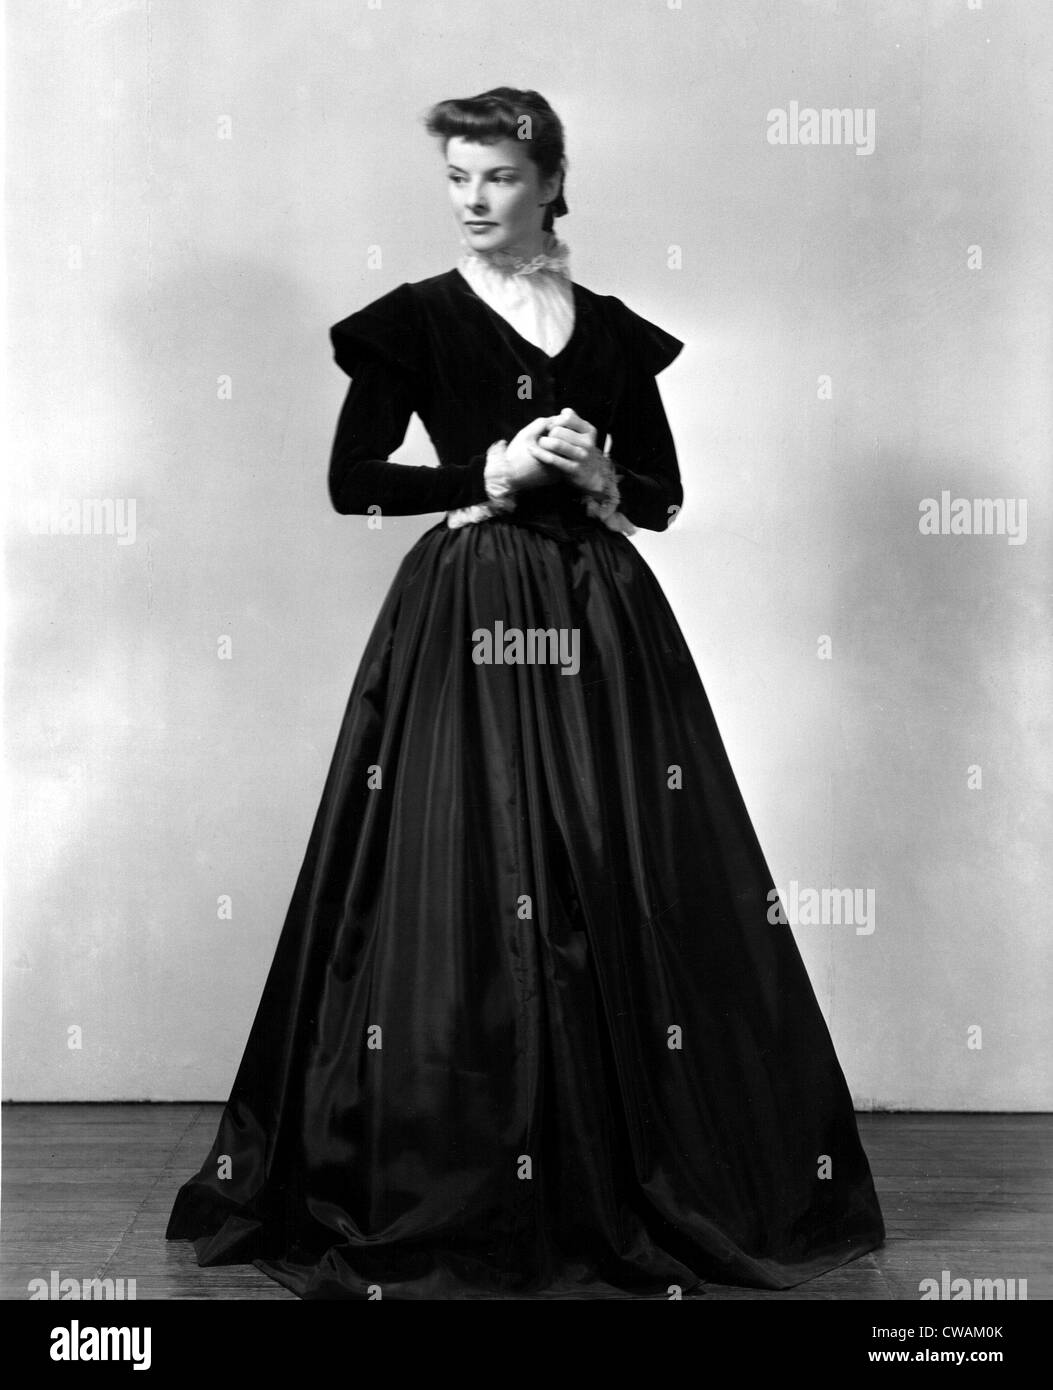 Katharine Hepburn in costume for the stage production of JANE EYRE in the 1930s. Courtesy: CSU Archives / Everett Collection Stock Photo